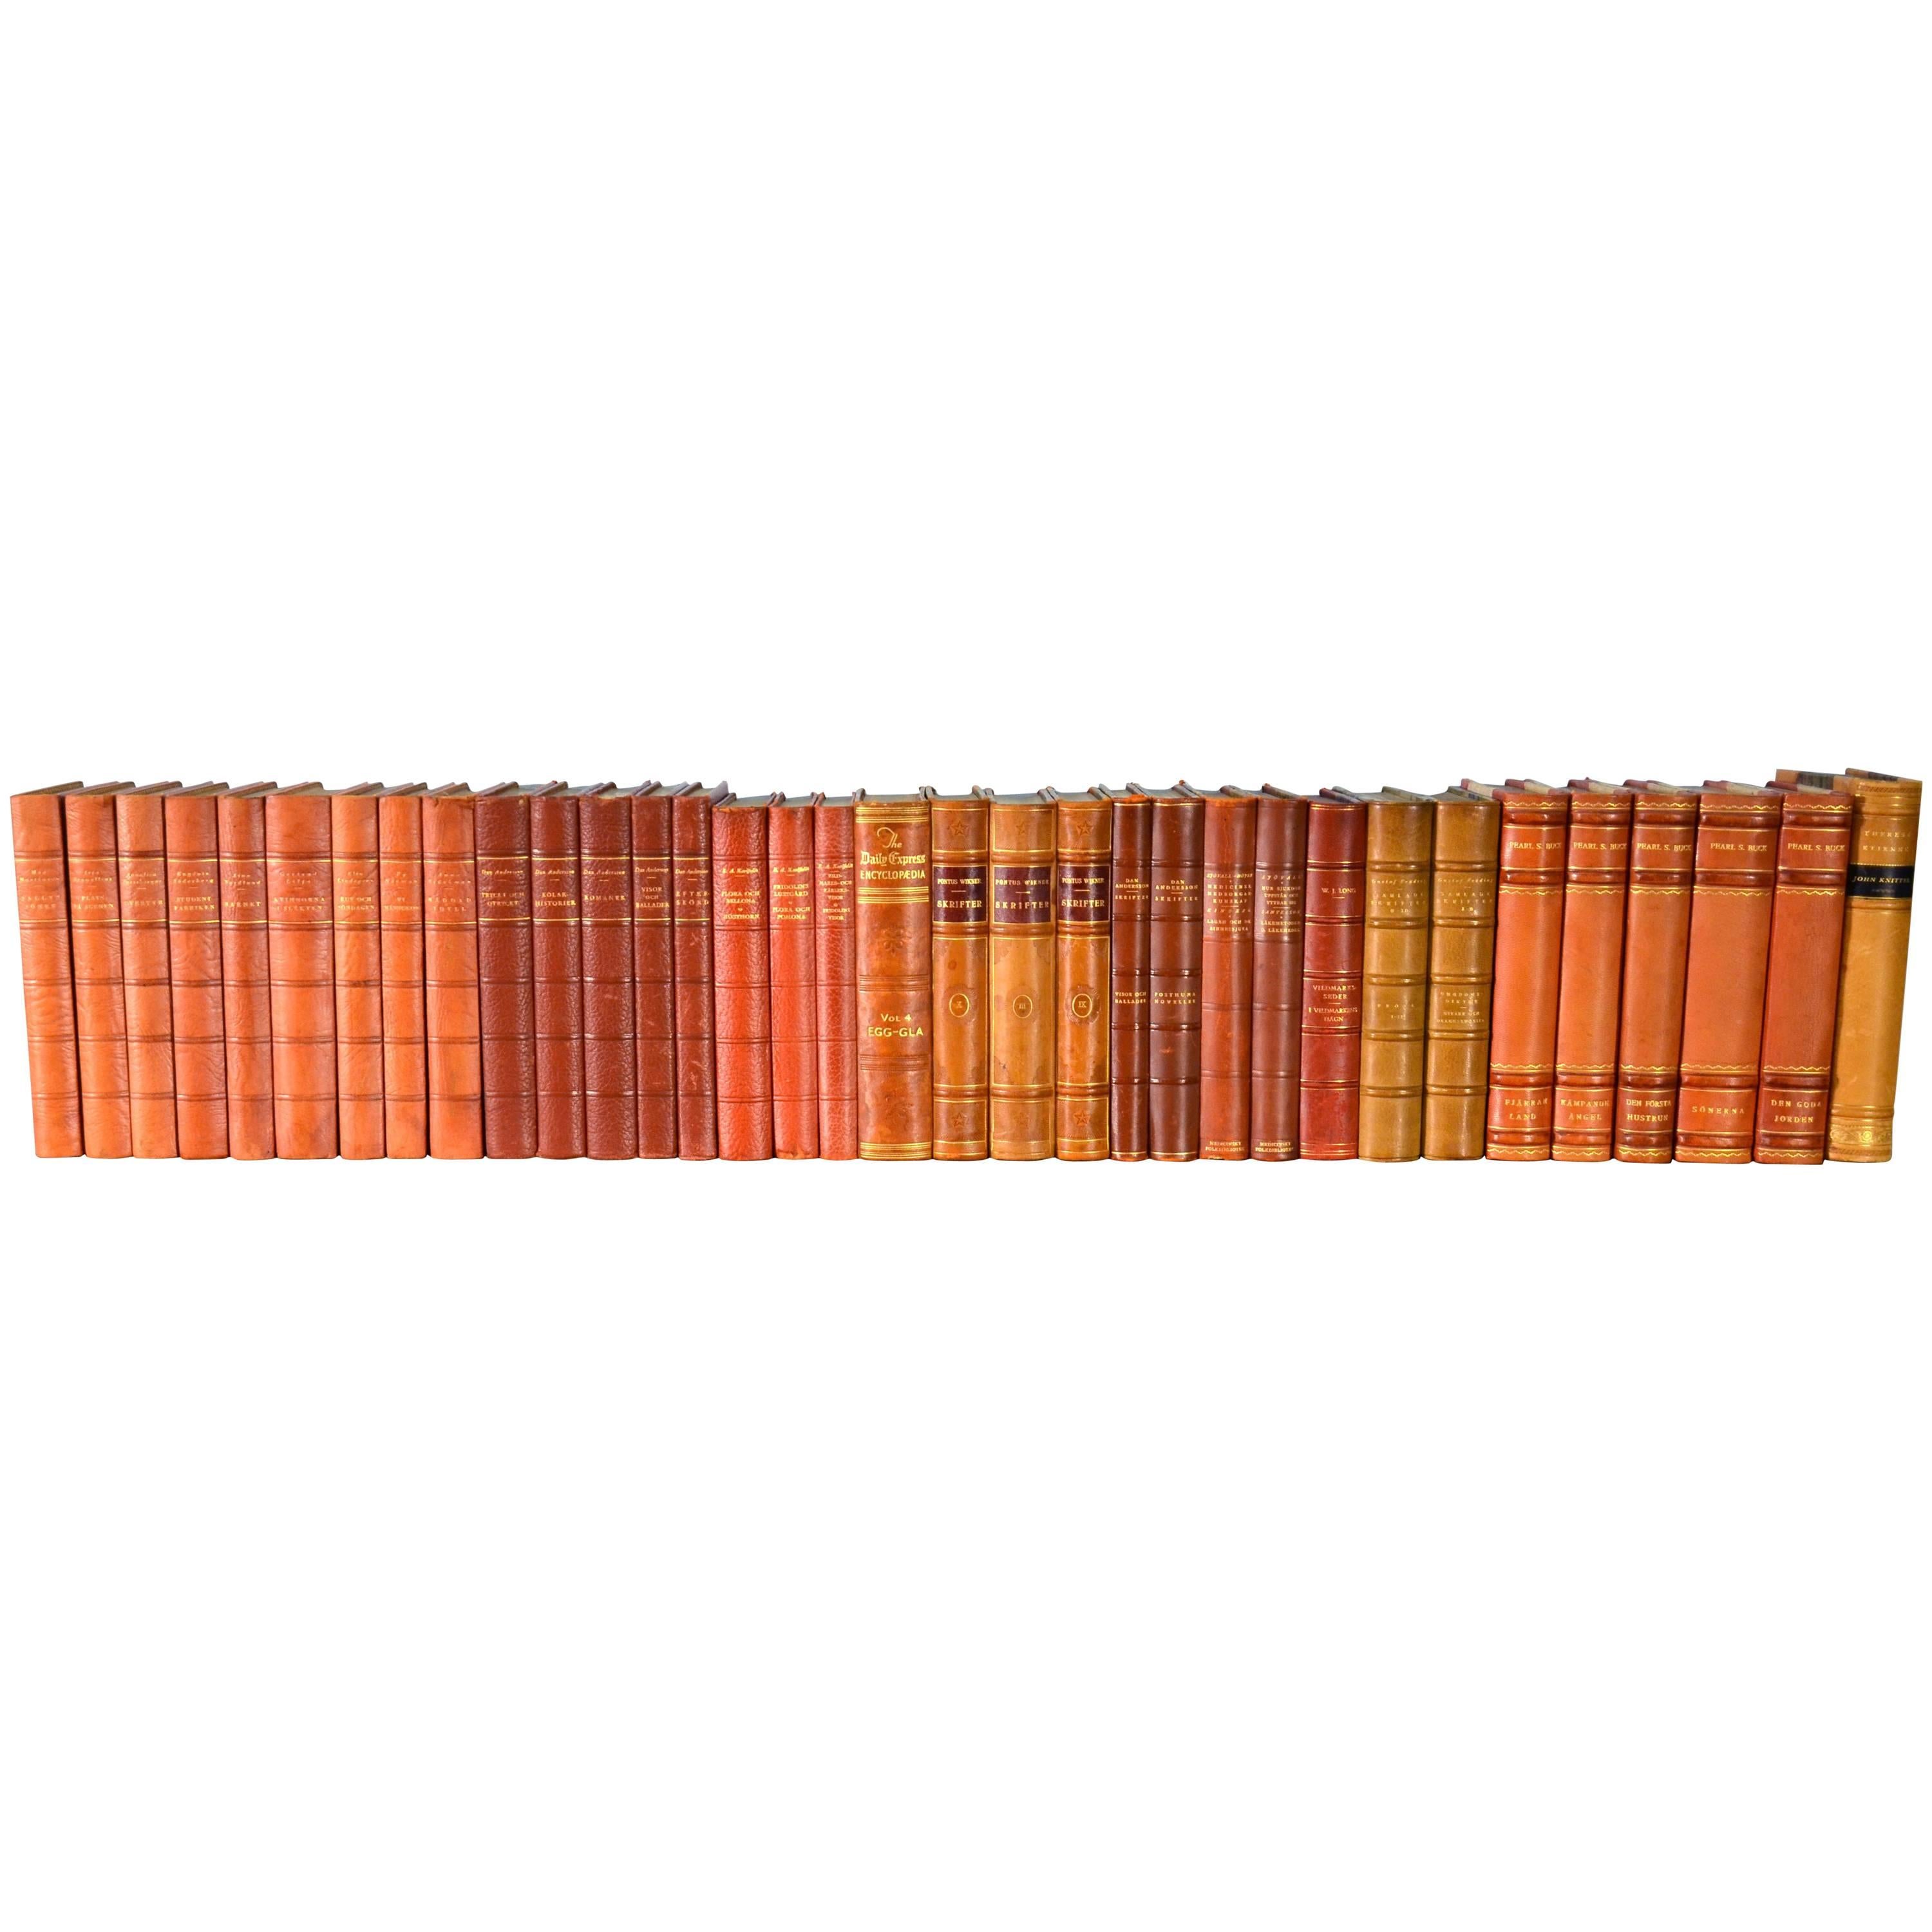 Collection of Leather Bound Books, Series 116